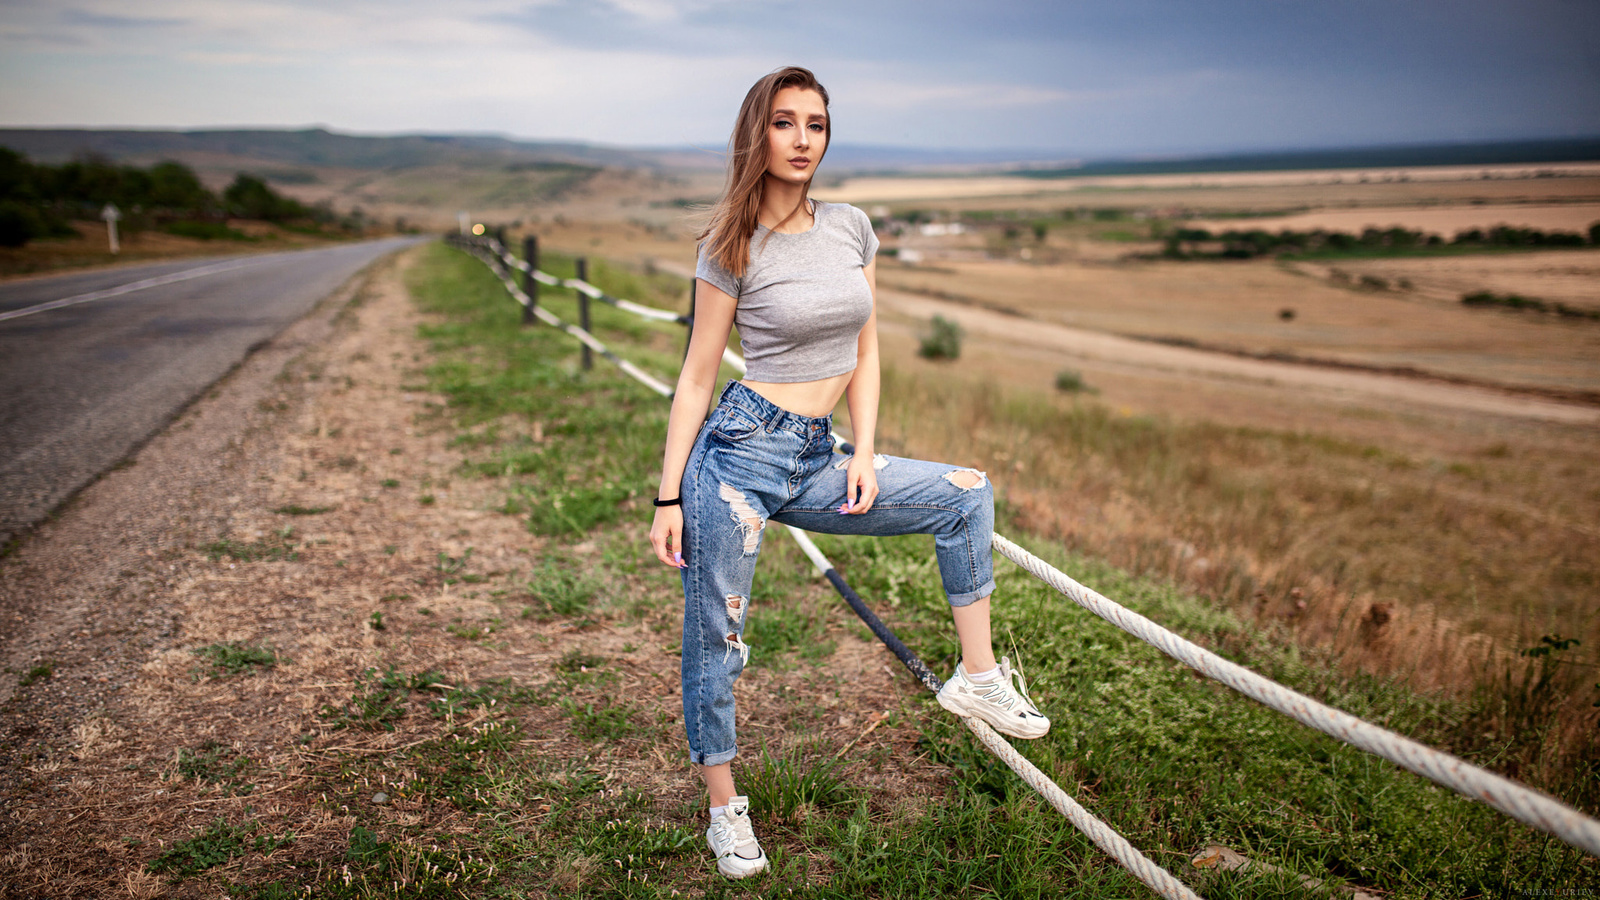 women, torn jeans, fence, ropes, sneakers, crop top, t-shirt, women outdoors, road, painted nails,  